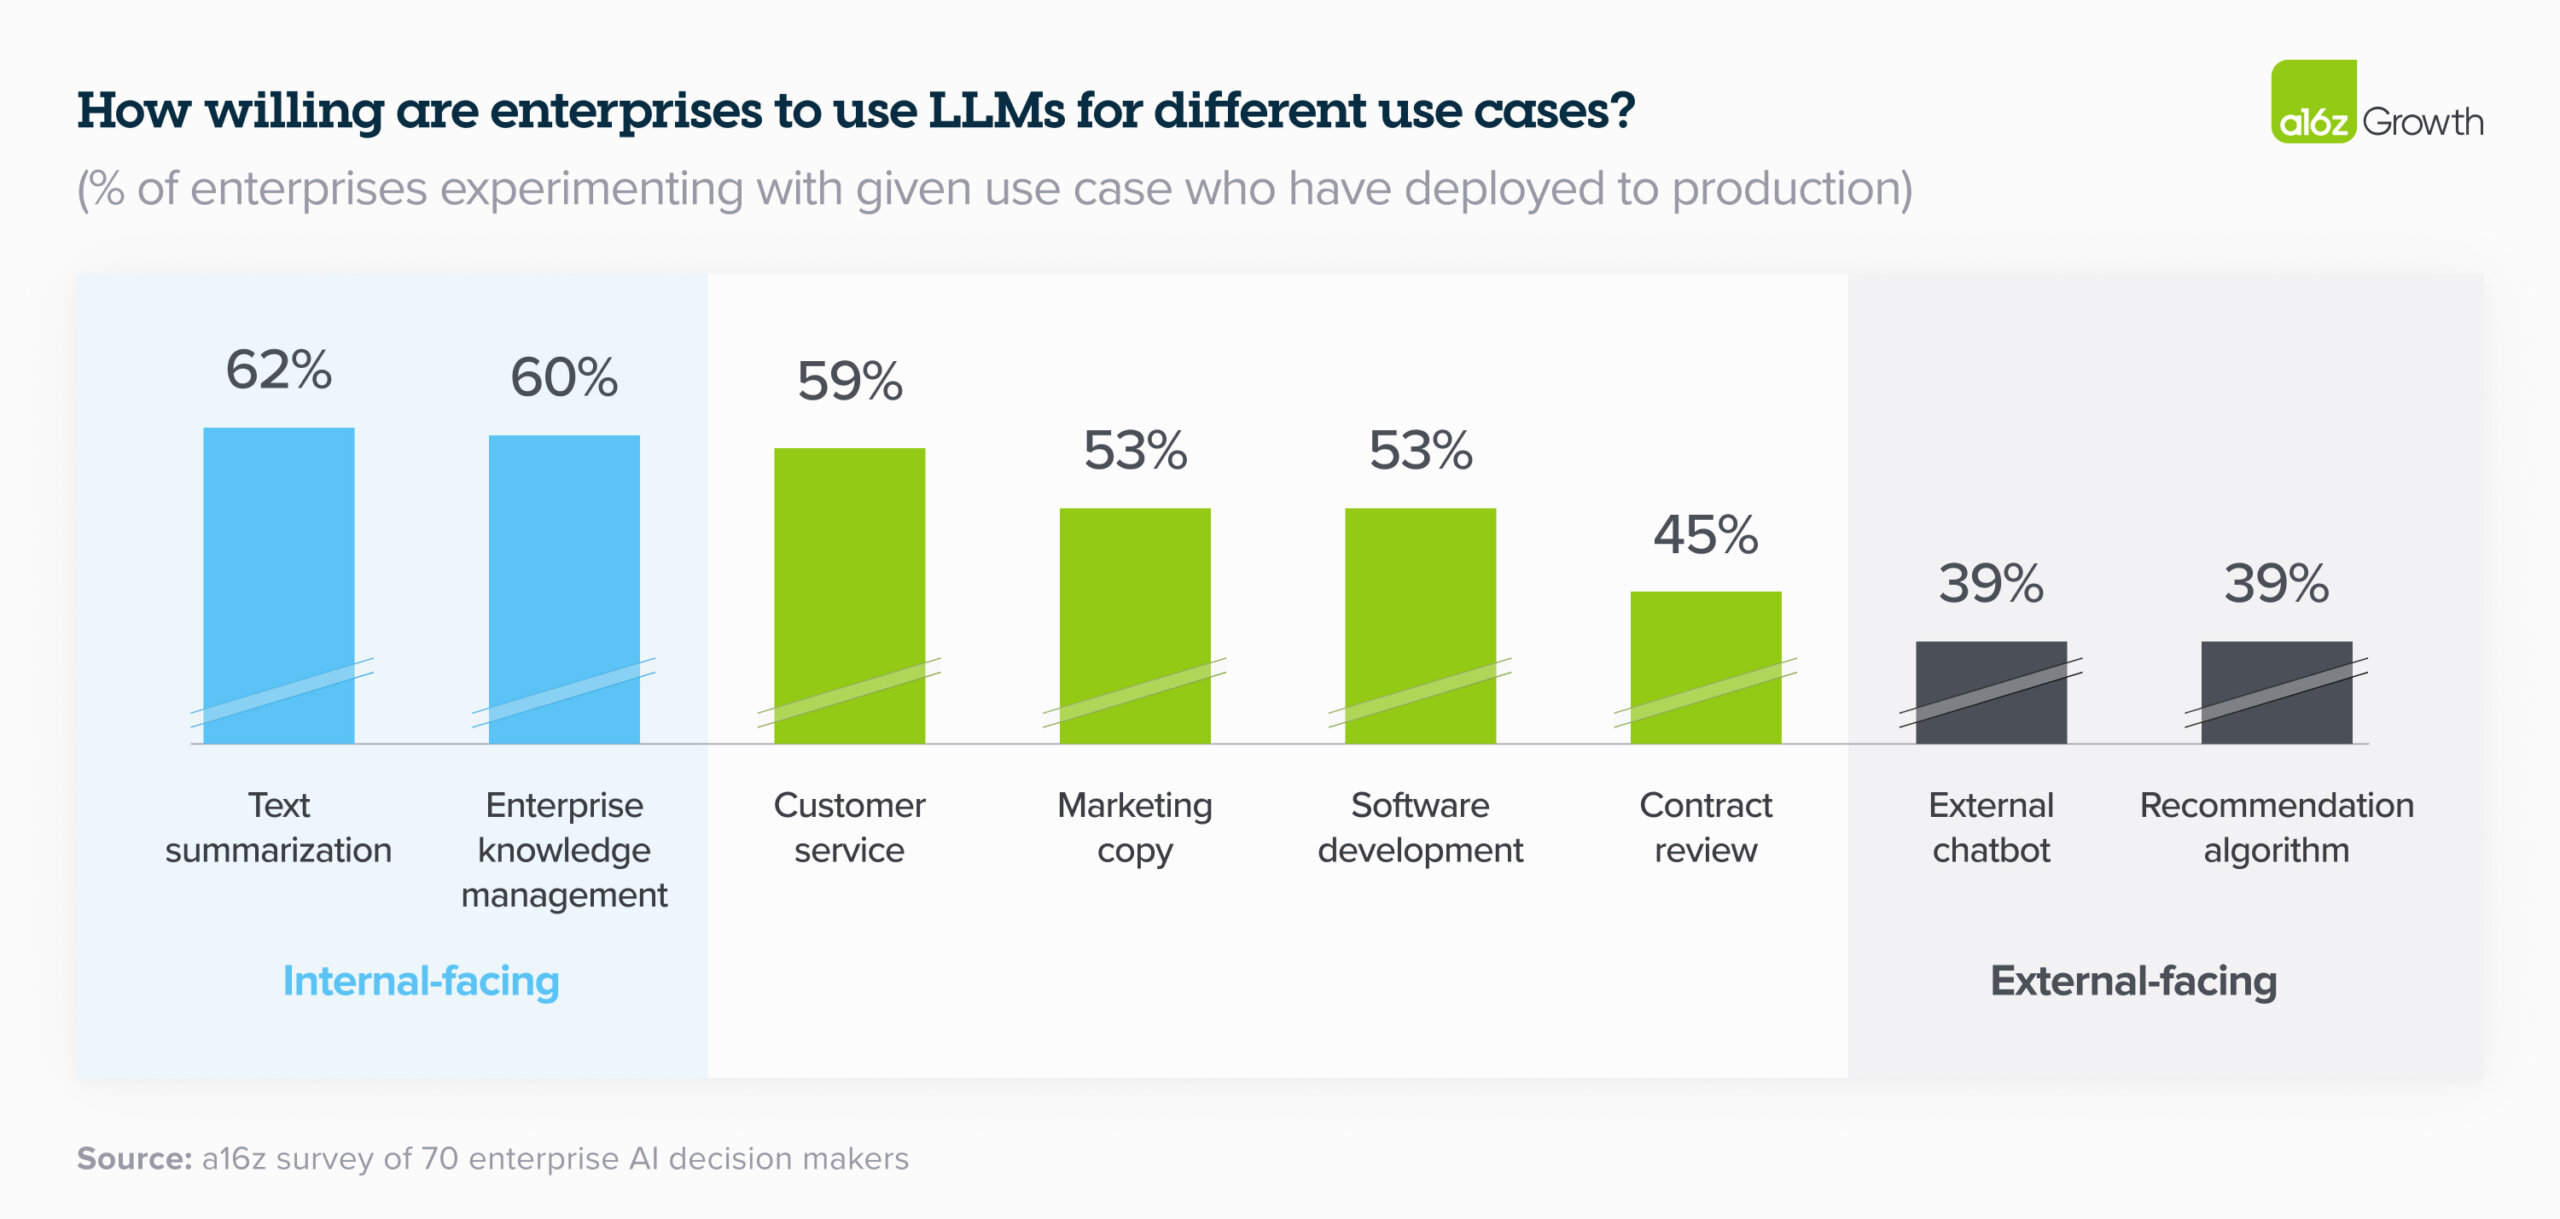 Internal-facing use cases have higher deployment rates than external